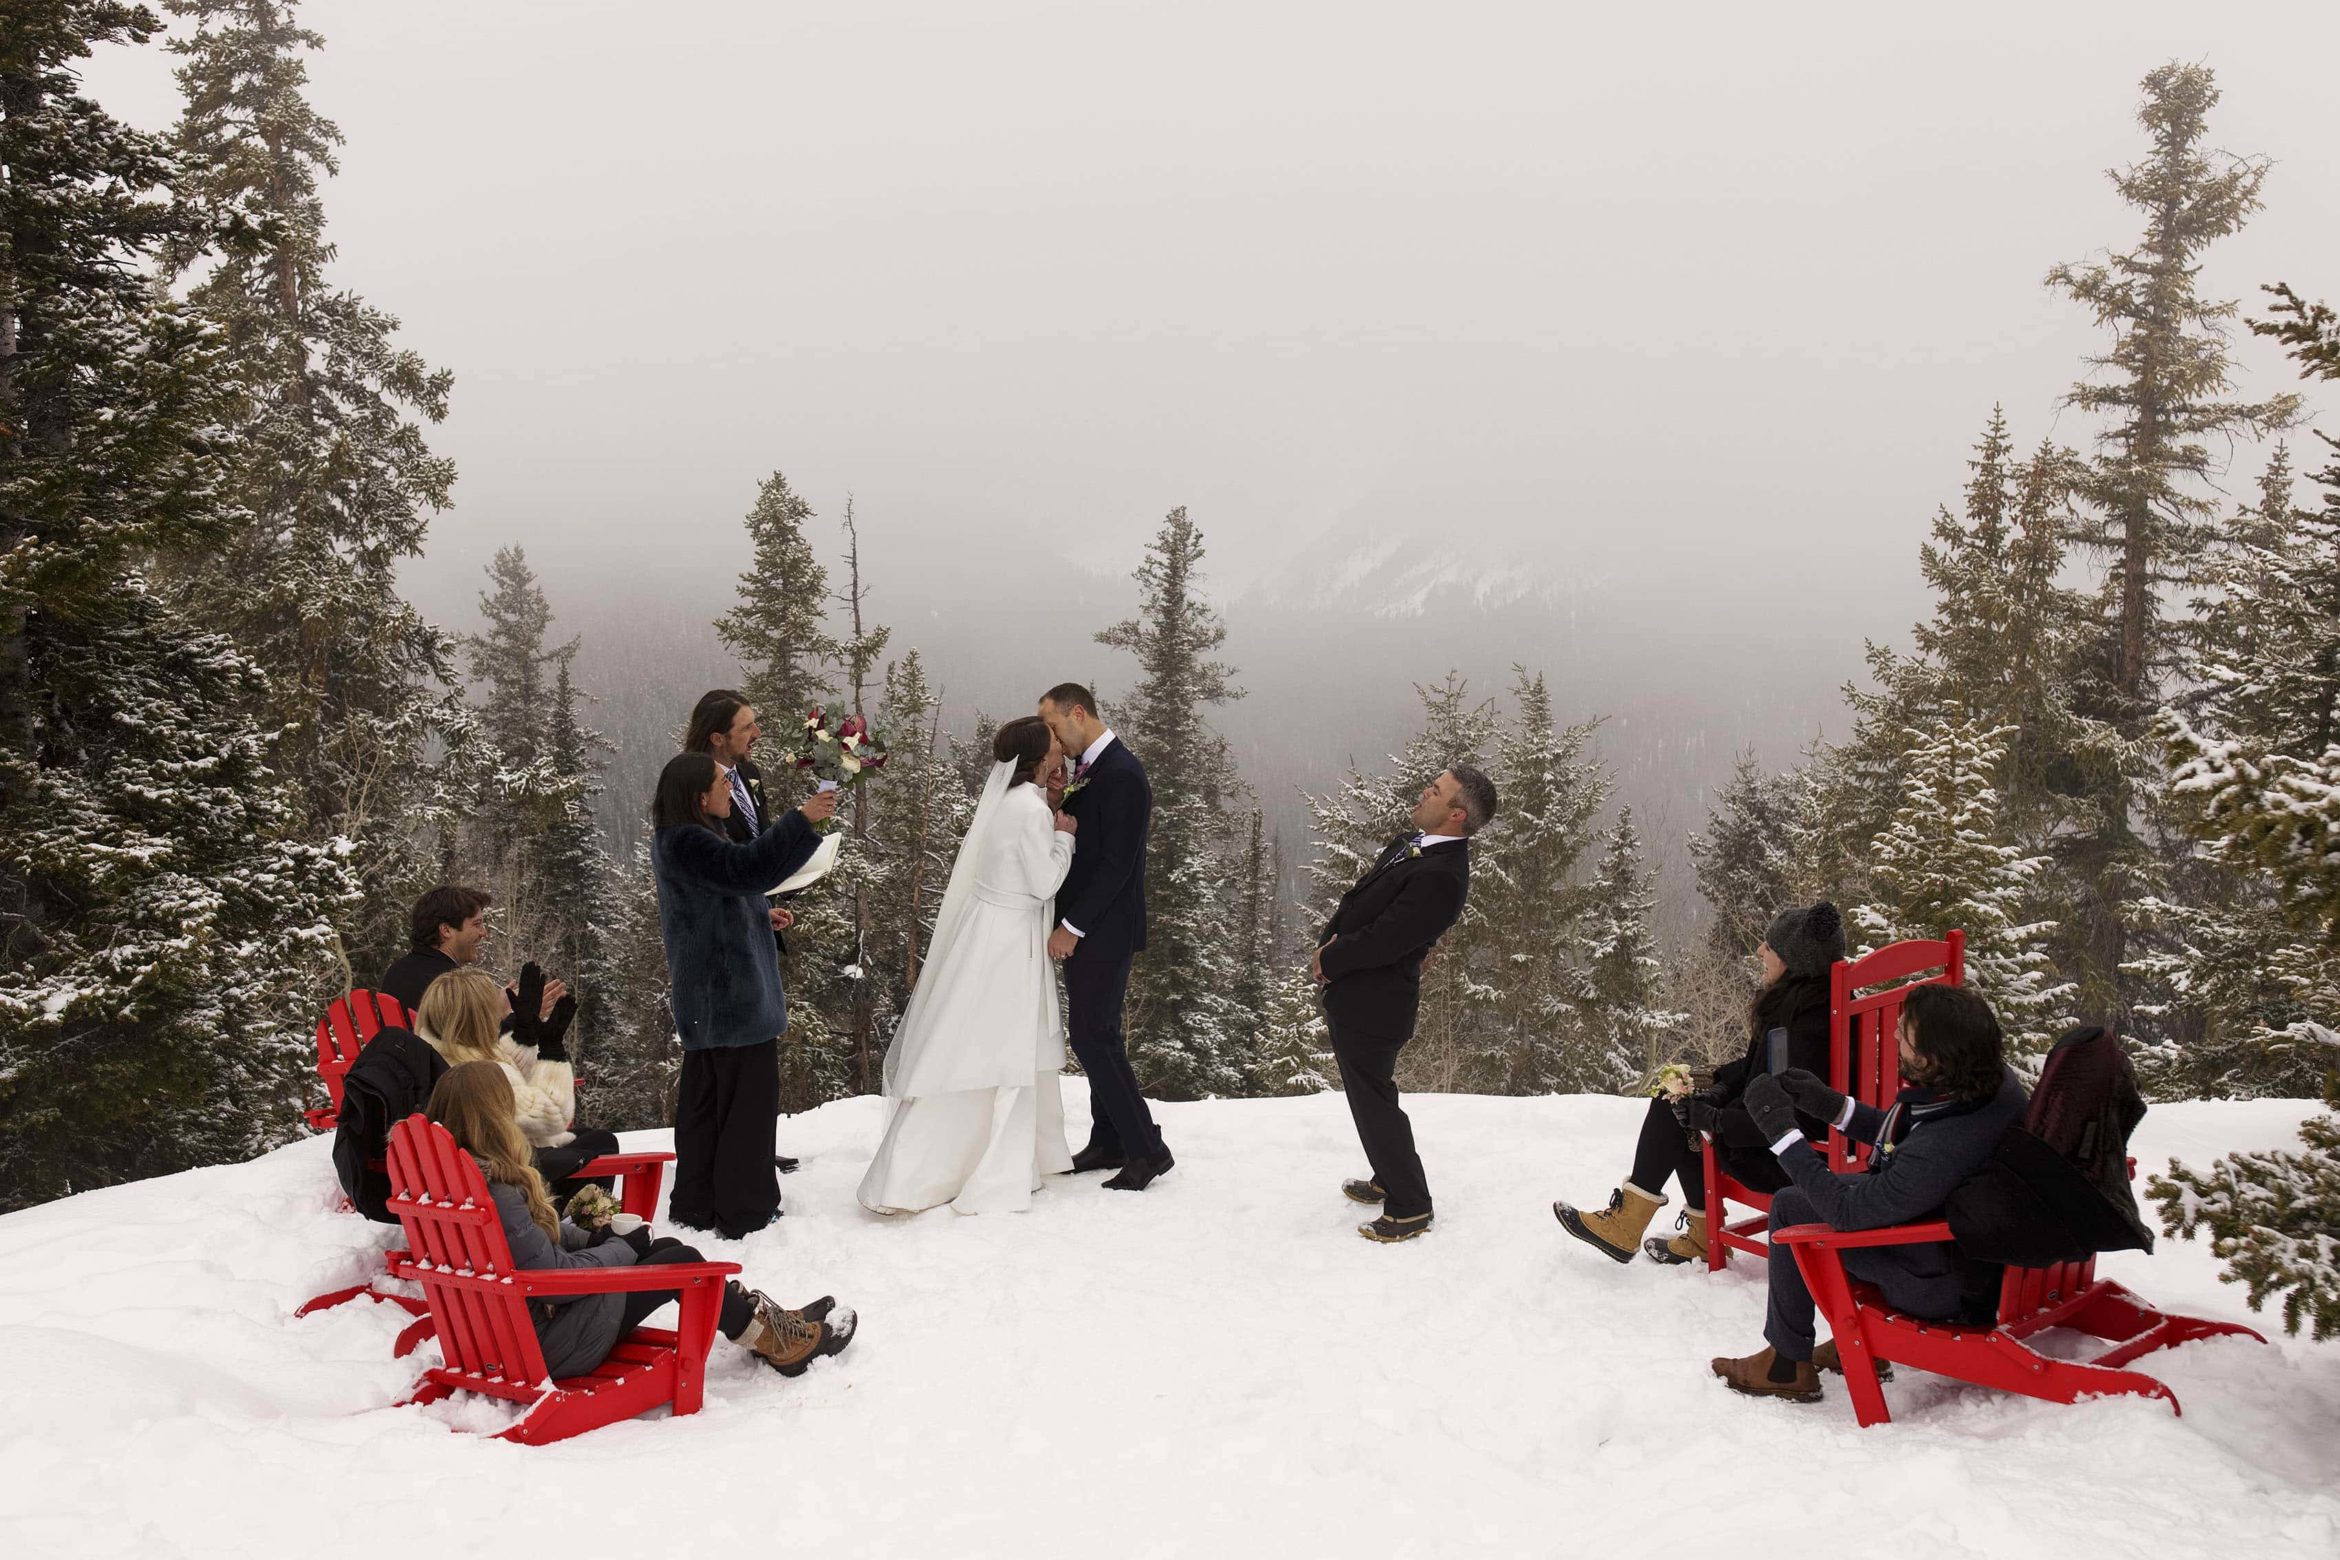 Olivia and Kyle’s first kiss on the snowy Aspen wedding deck